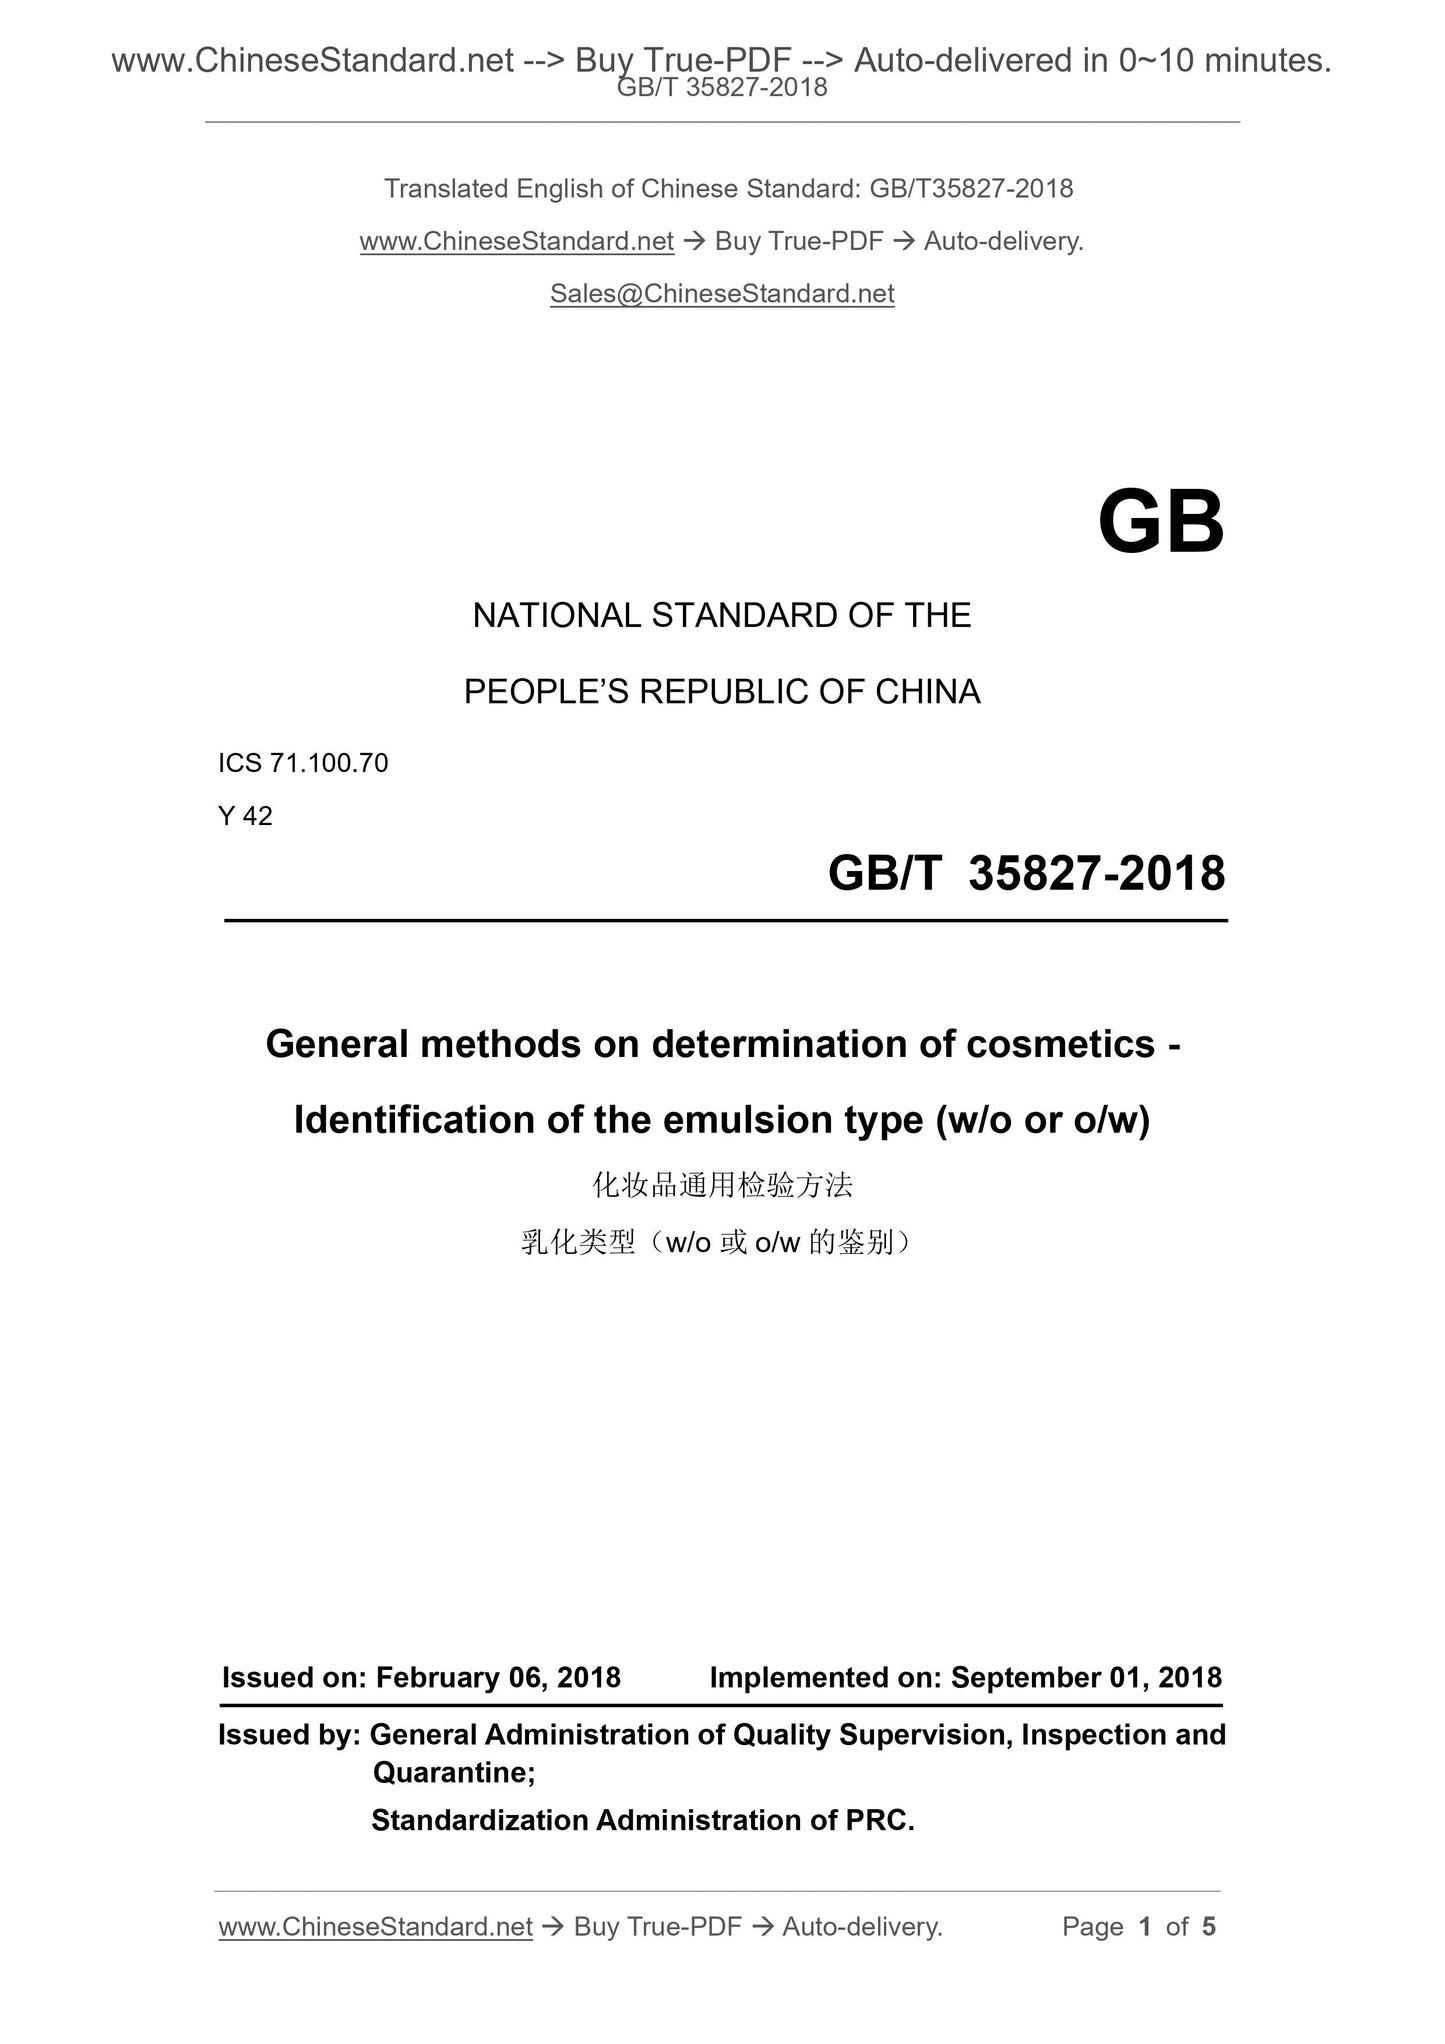 GB/T 35827-2018 Page 1